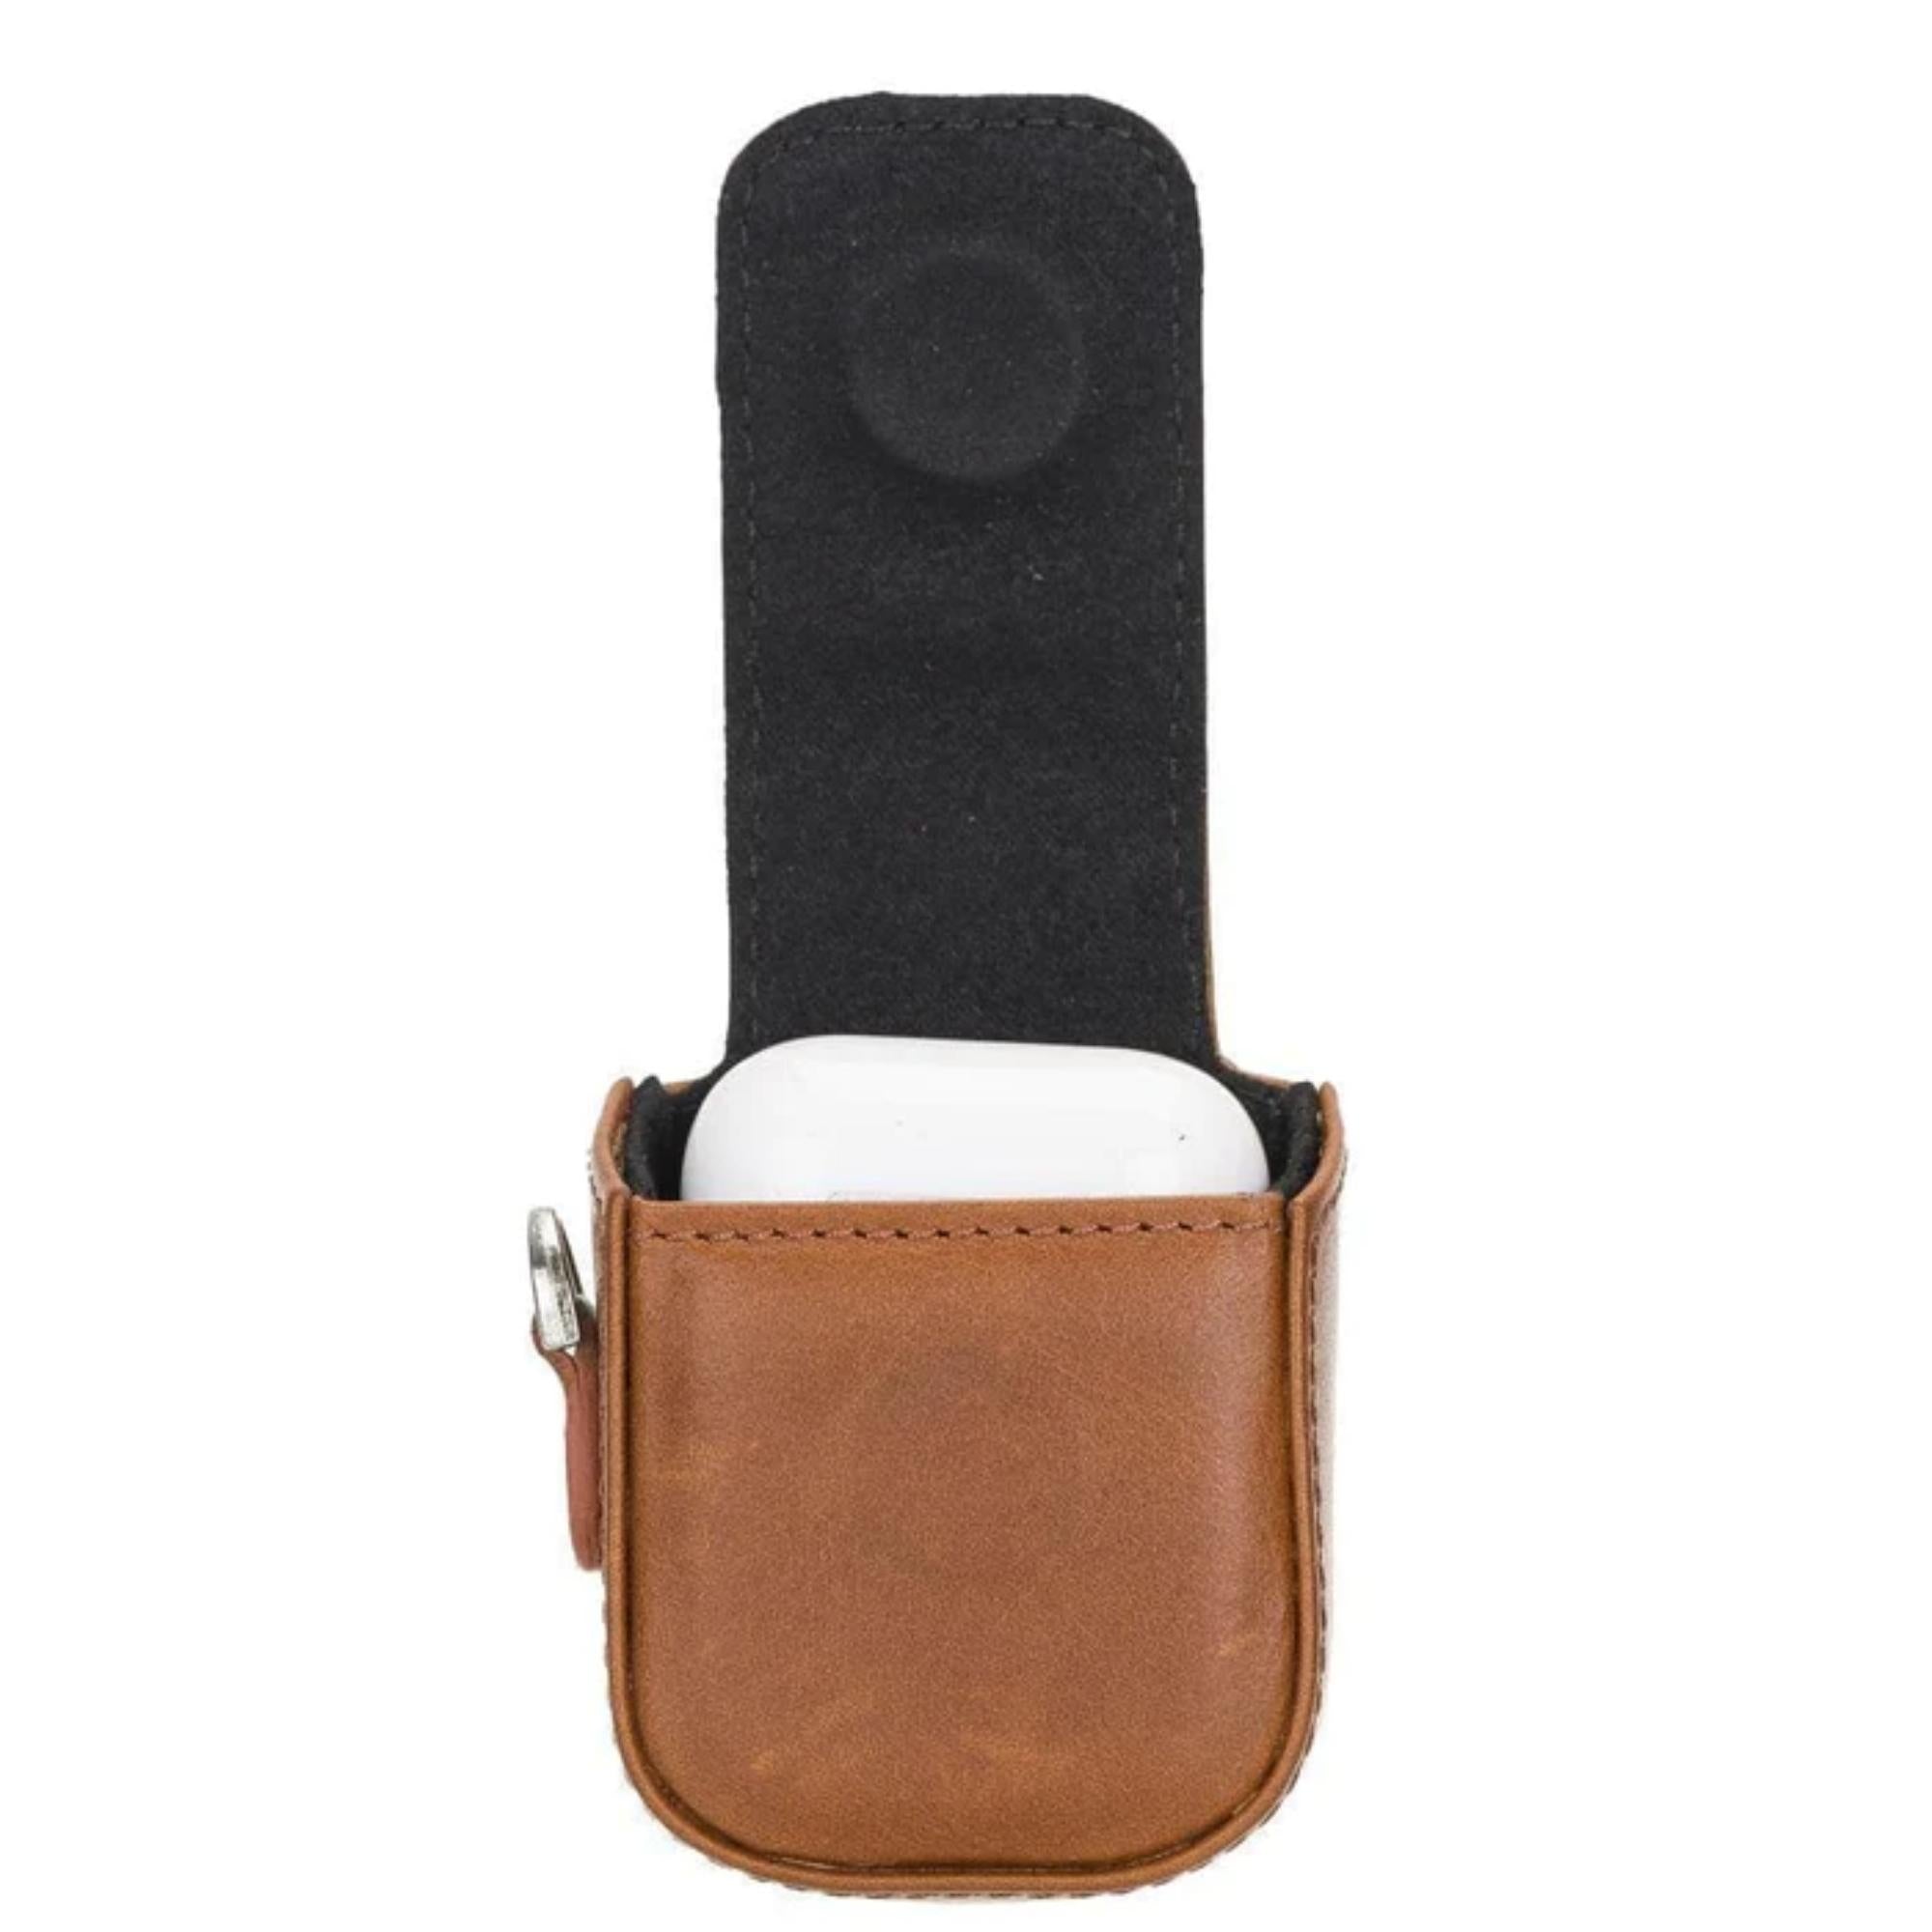 Aurora Luxury Leather AirPods Case with Attached Wrist Strap-Tan-AirPods 3-2-1 Generation--TORONATA